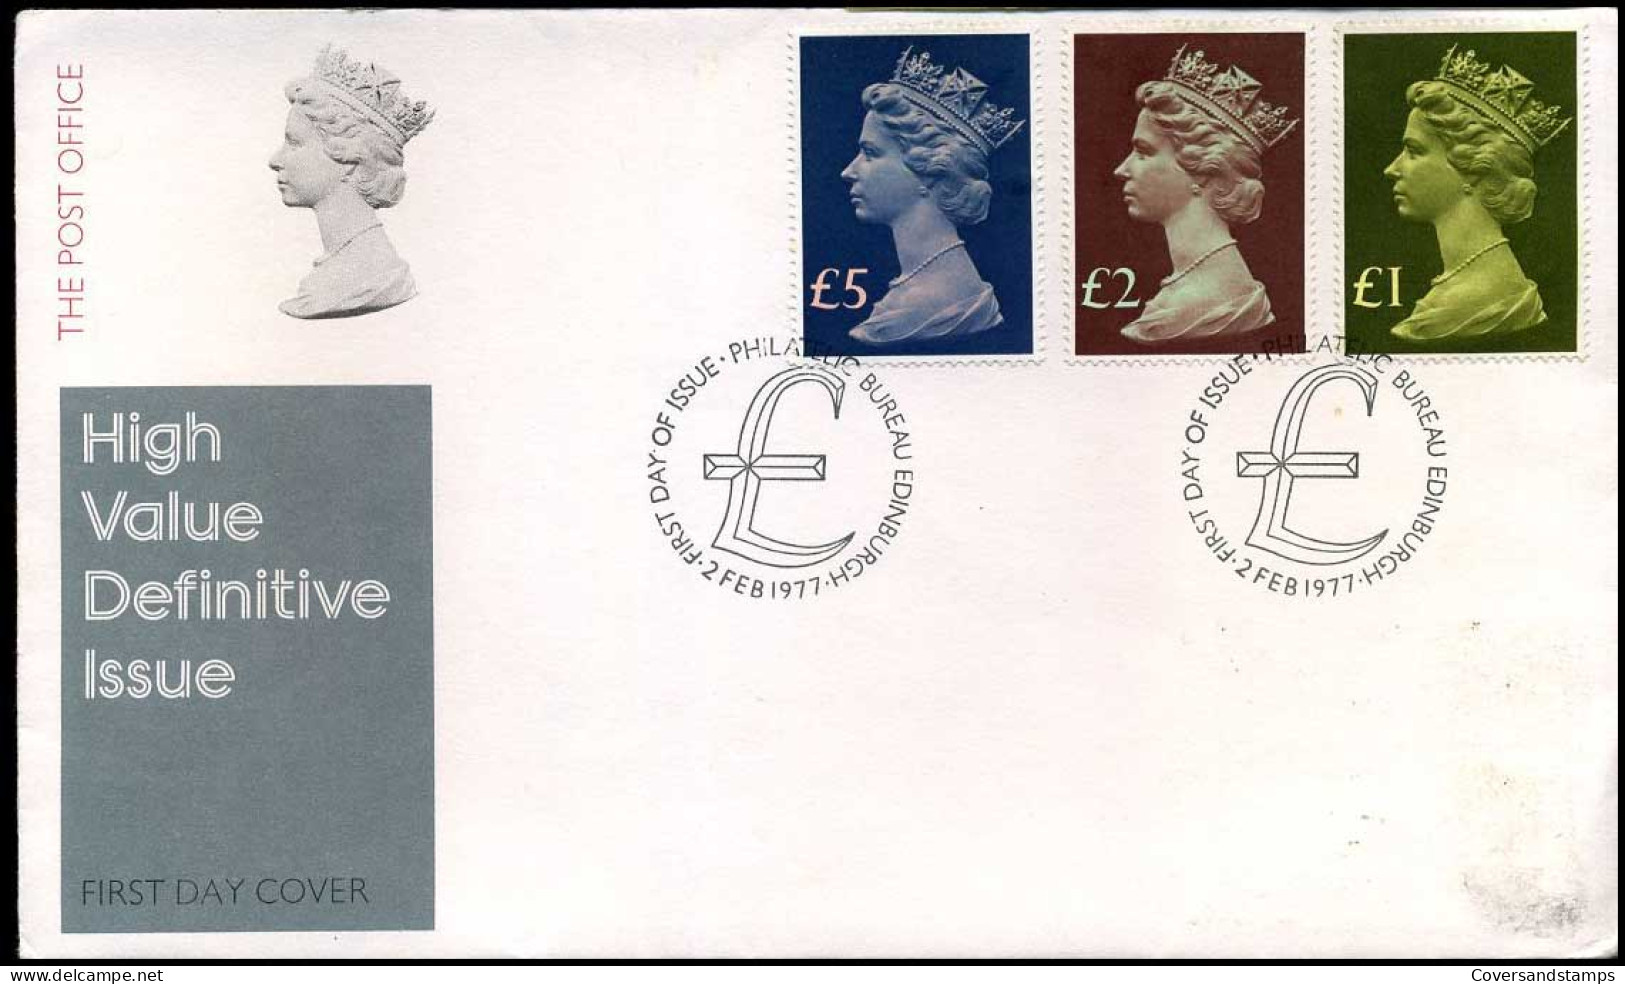 Great-Britain - FDC - High Value Definitive Issue - 1971-1980 Decimal Issues